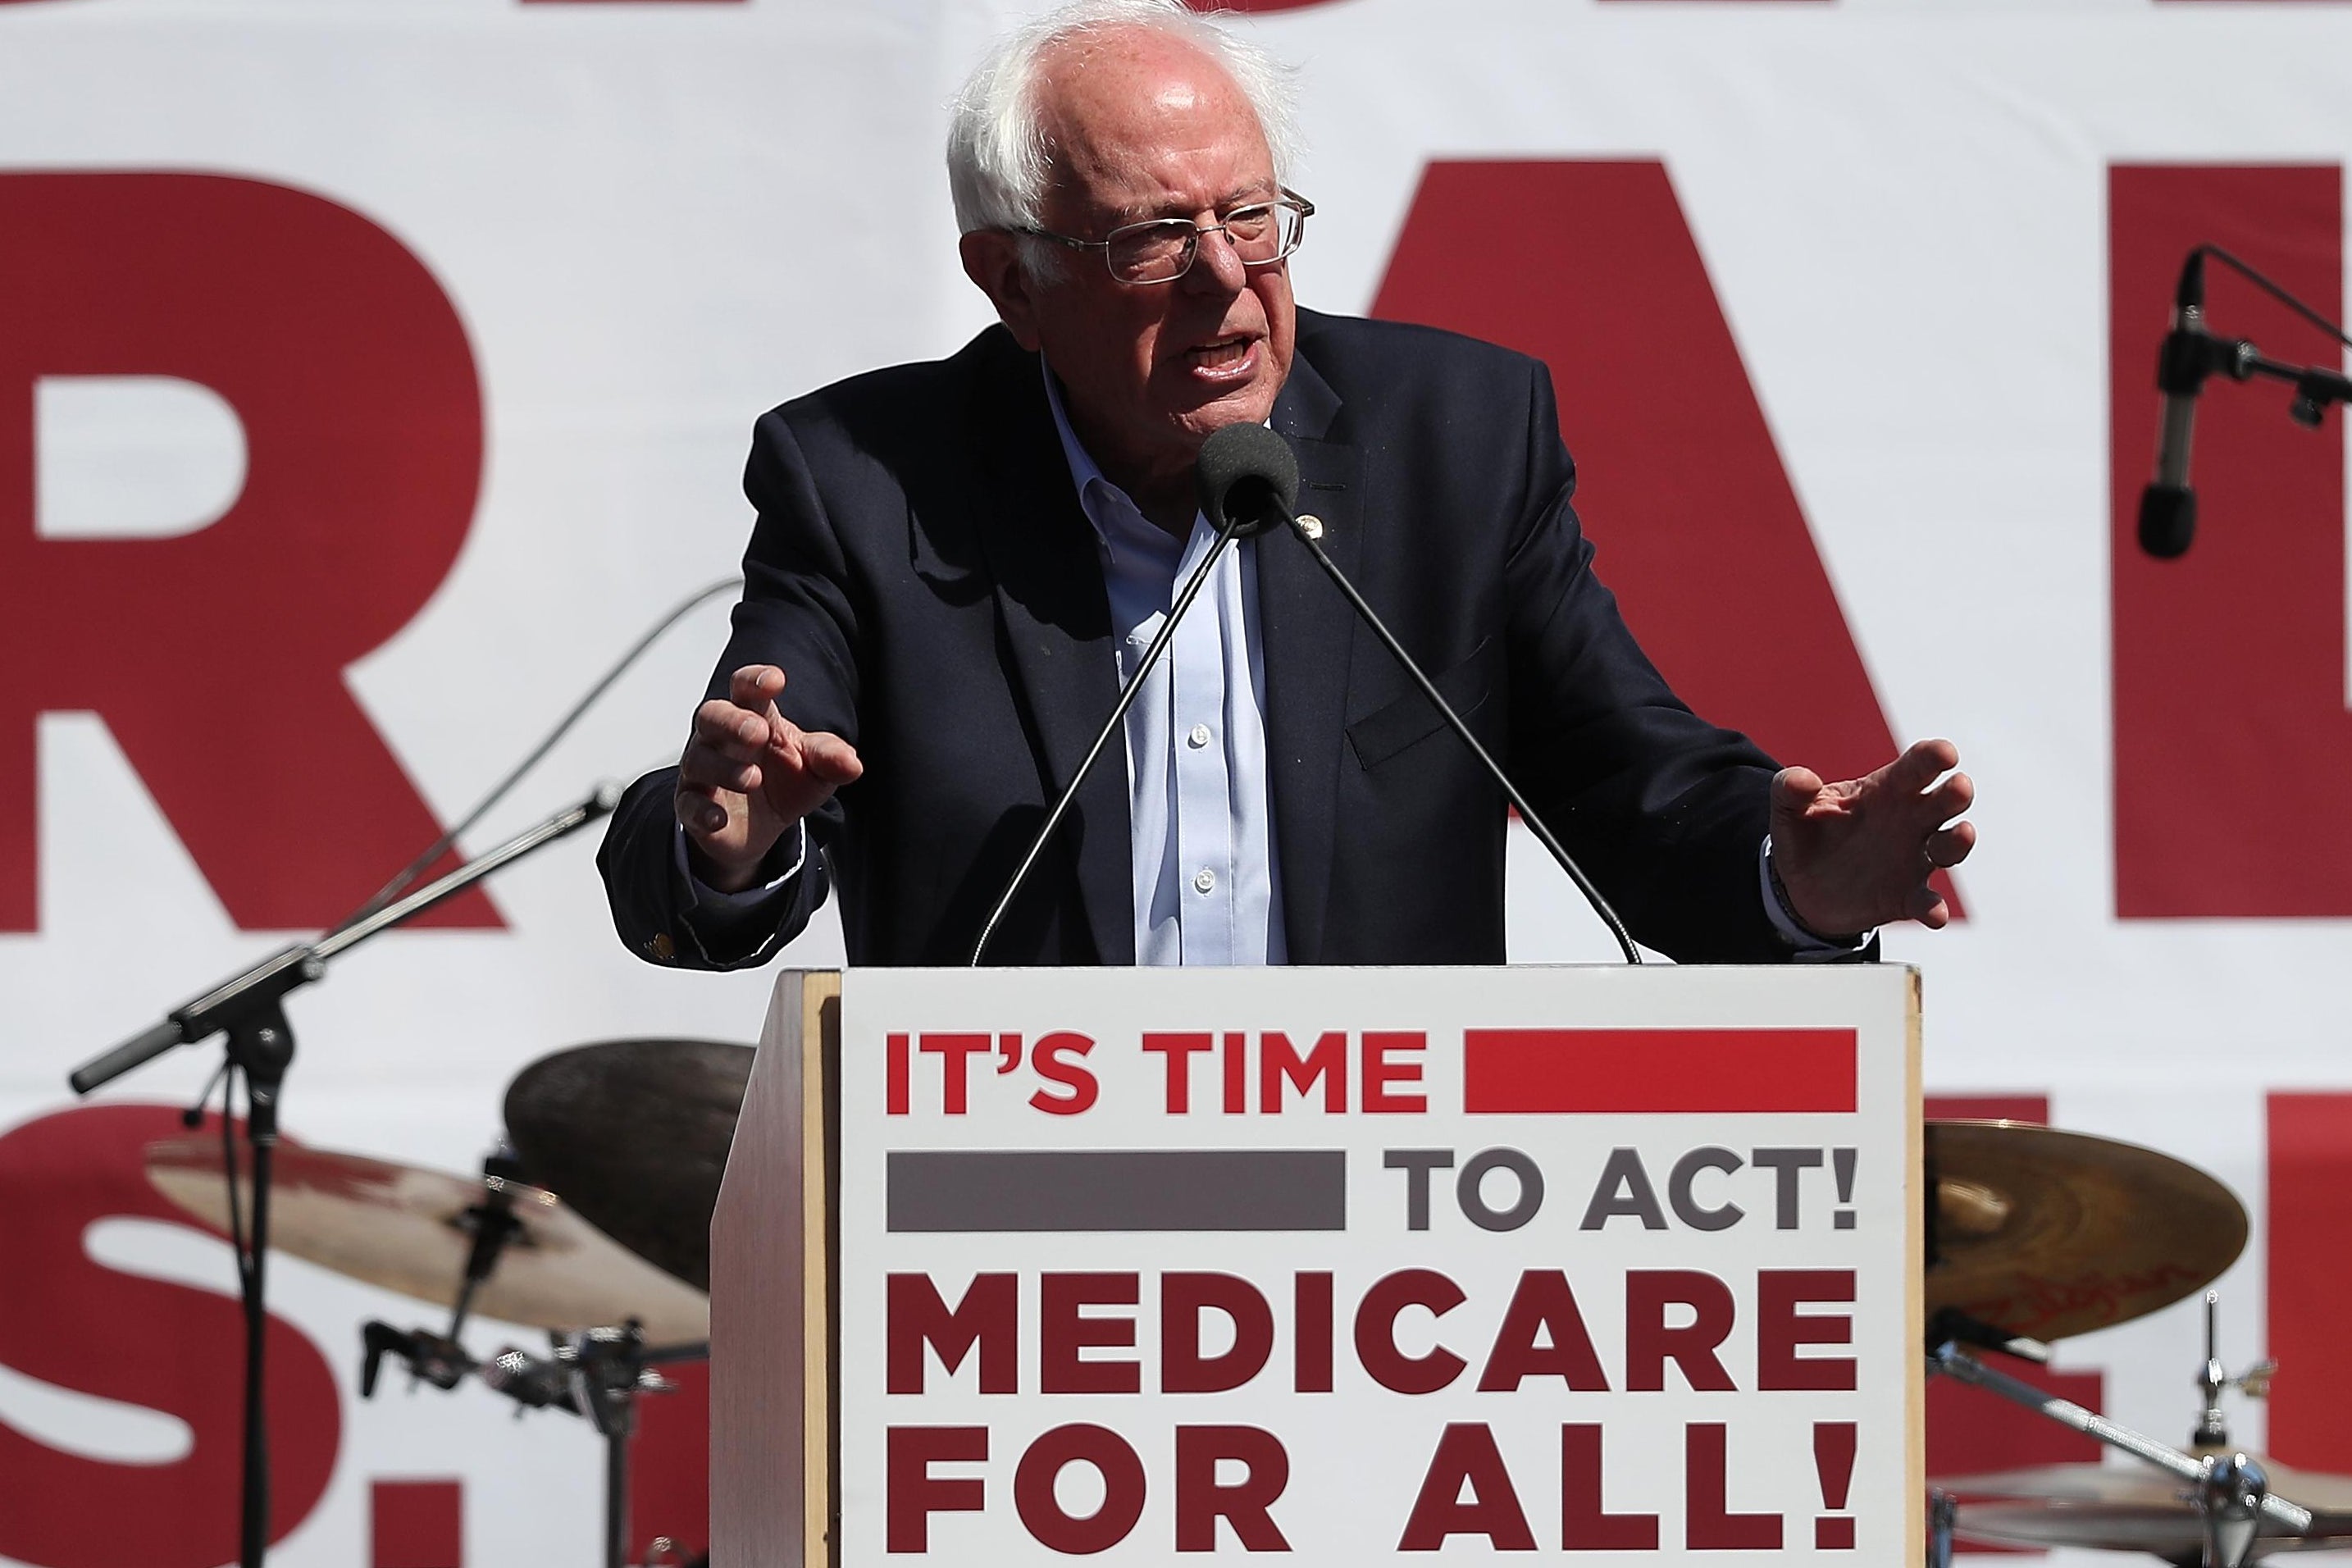 Bernie Sanders speaks from a podium that says "It's time to act! Medicare for all!"